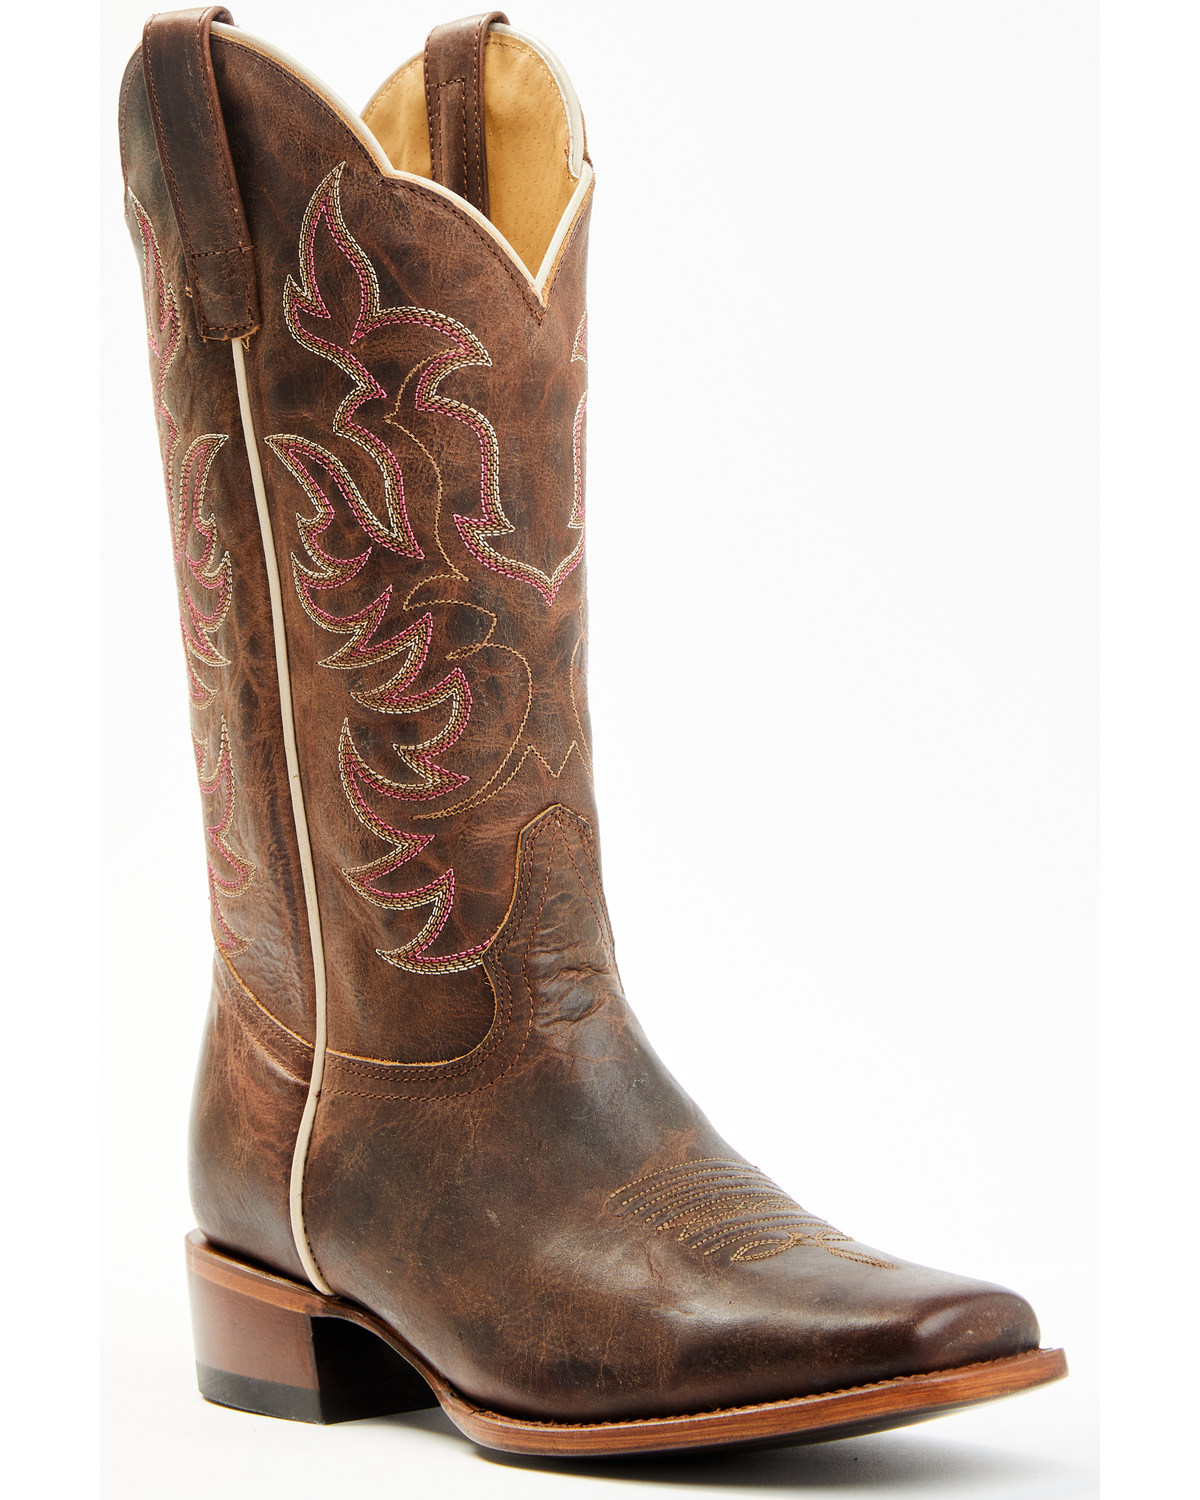 Shyanne Women's Cassidy Spice Combo Leather Western Boots - Square Toe